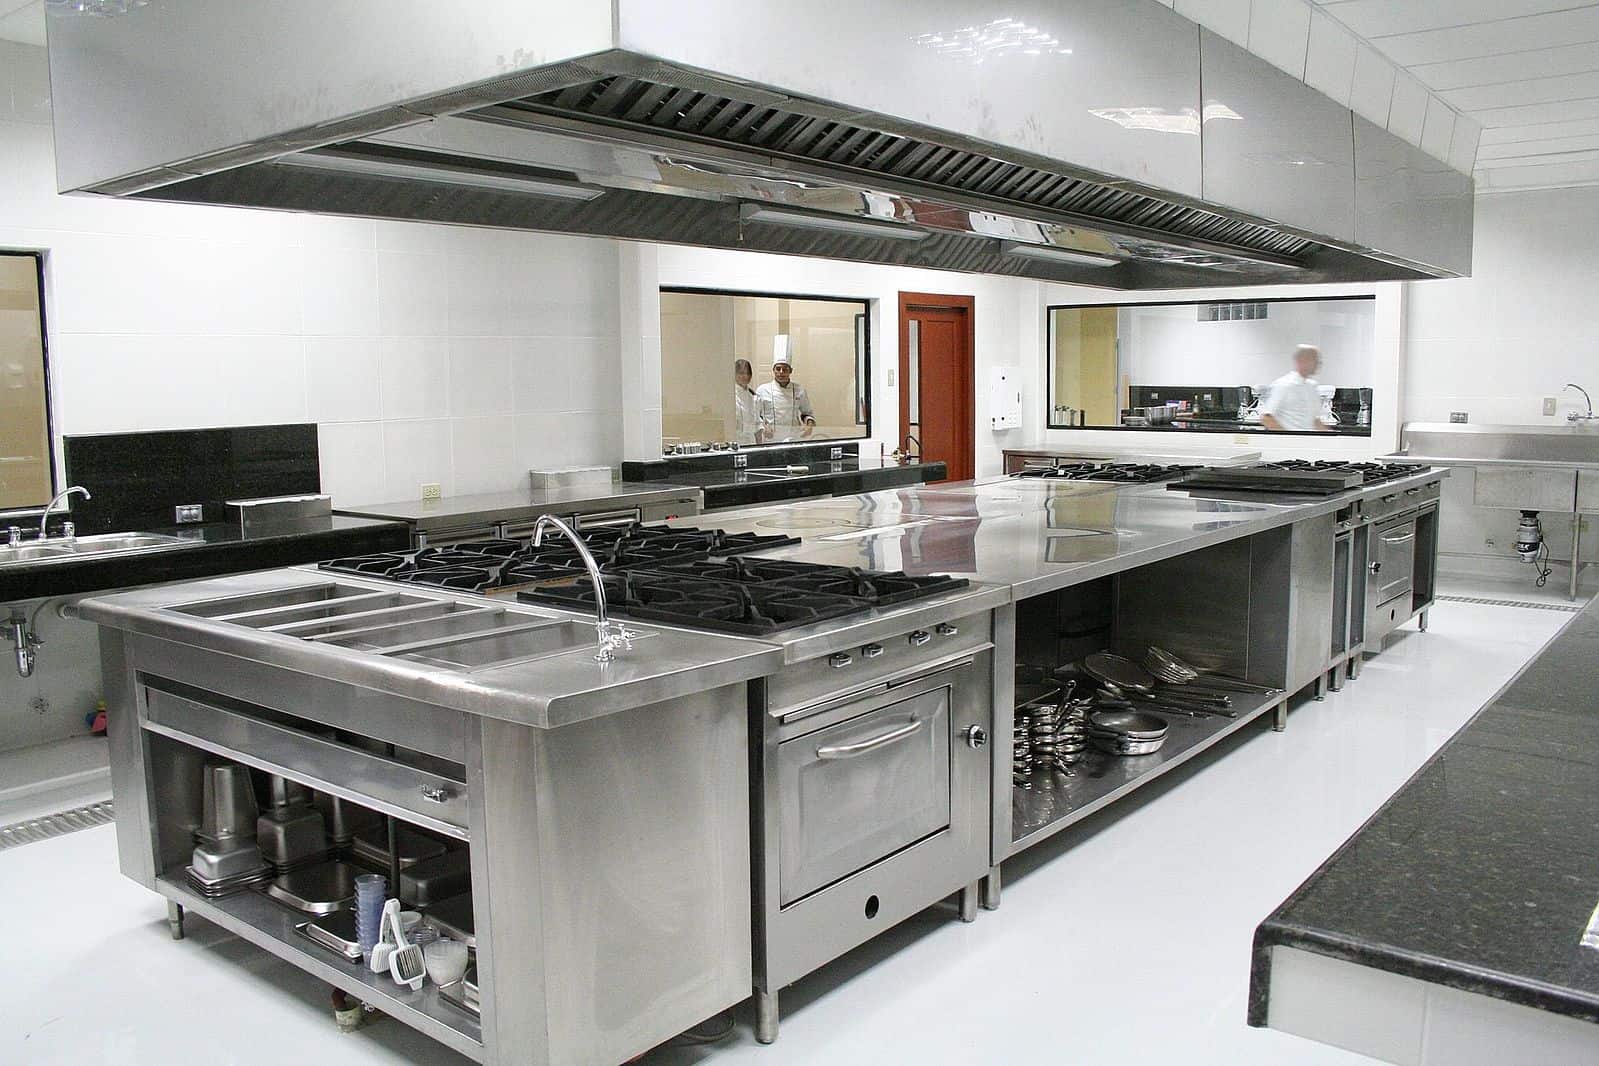 Why You Should Use Reconditioned Catering Equipment